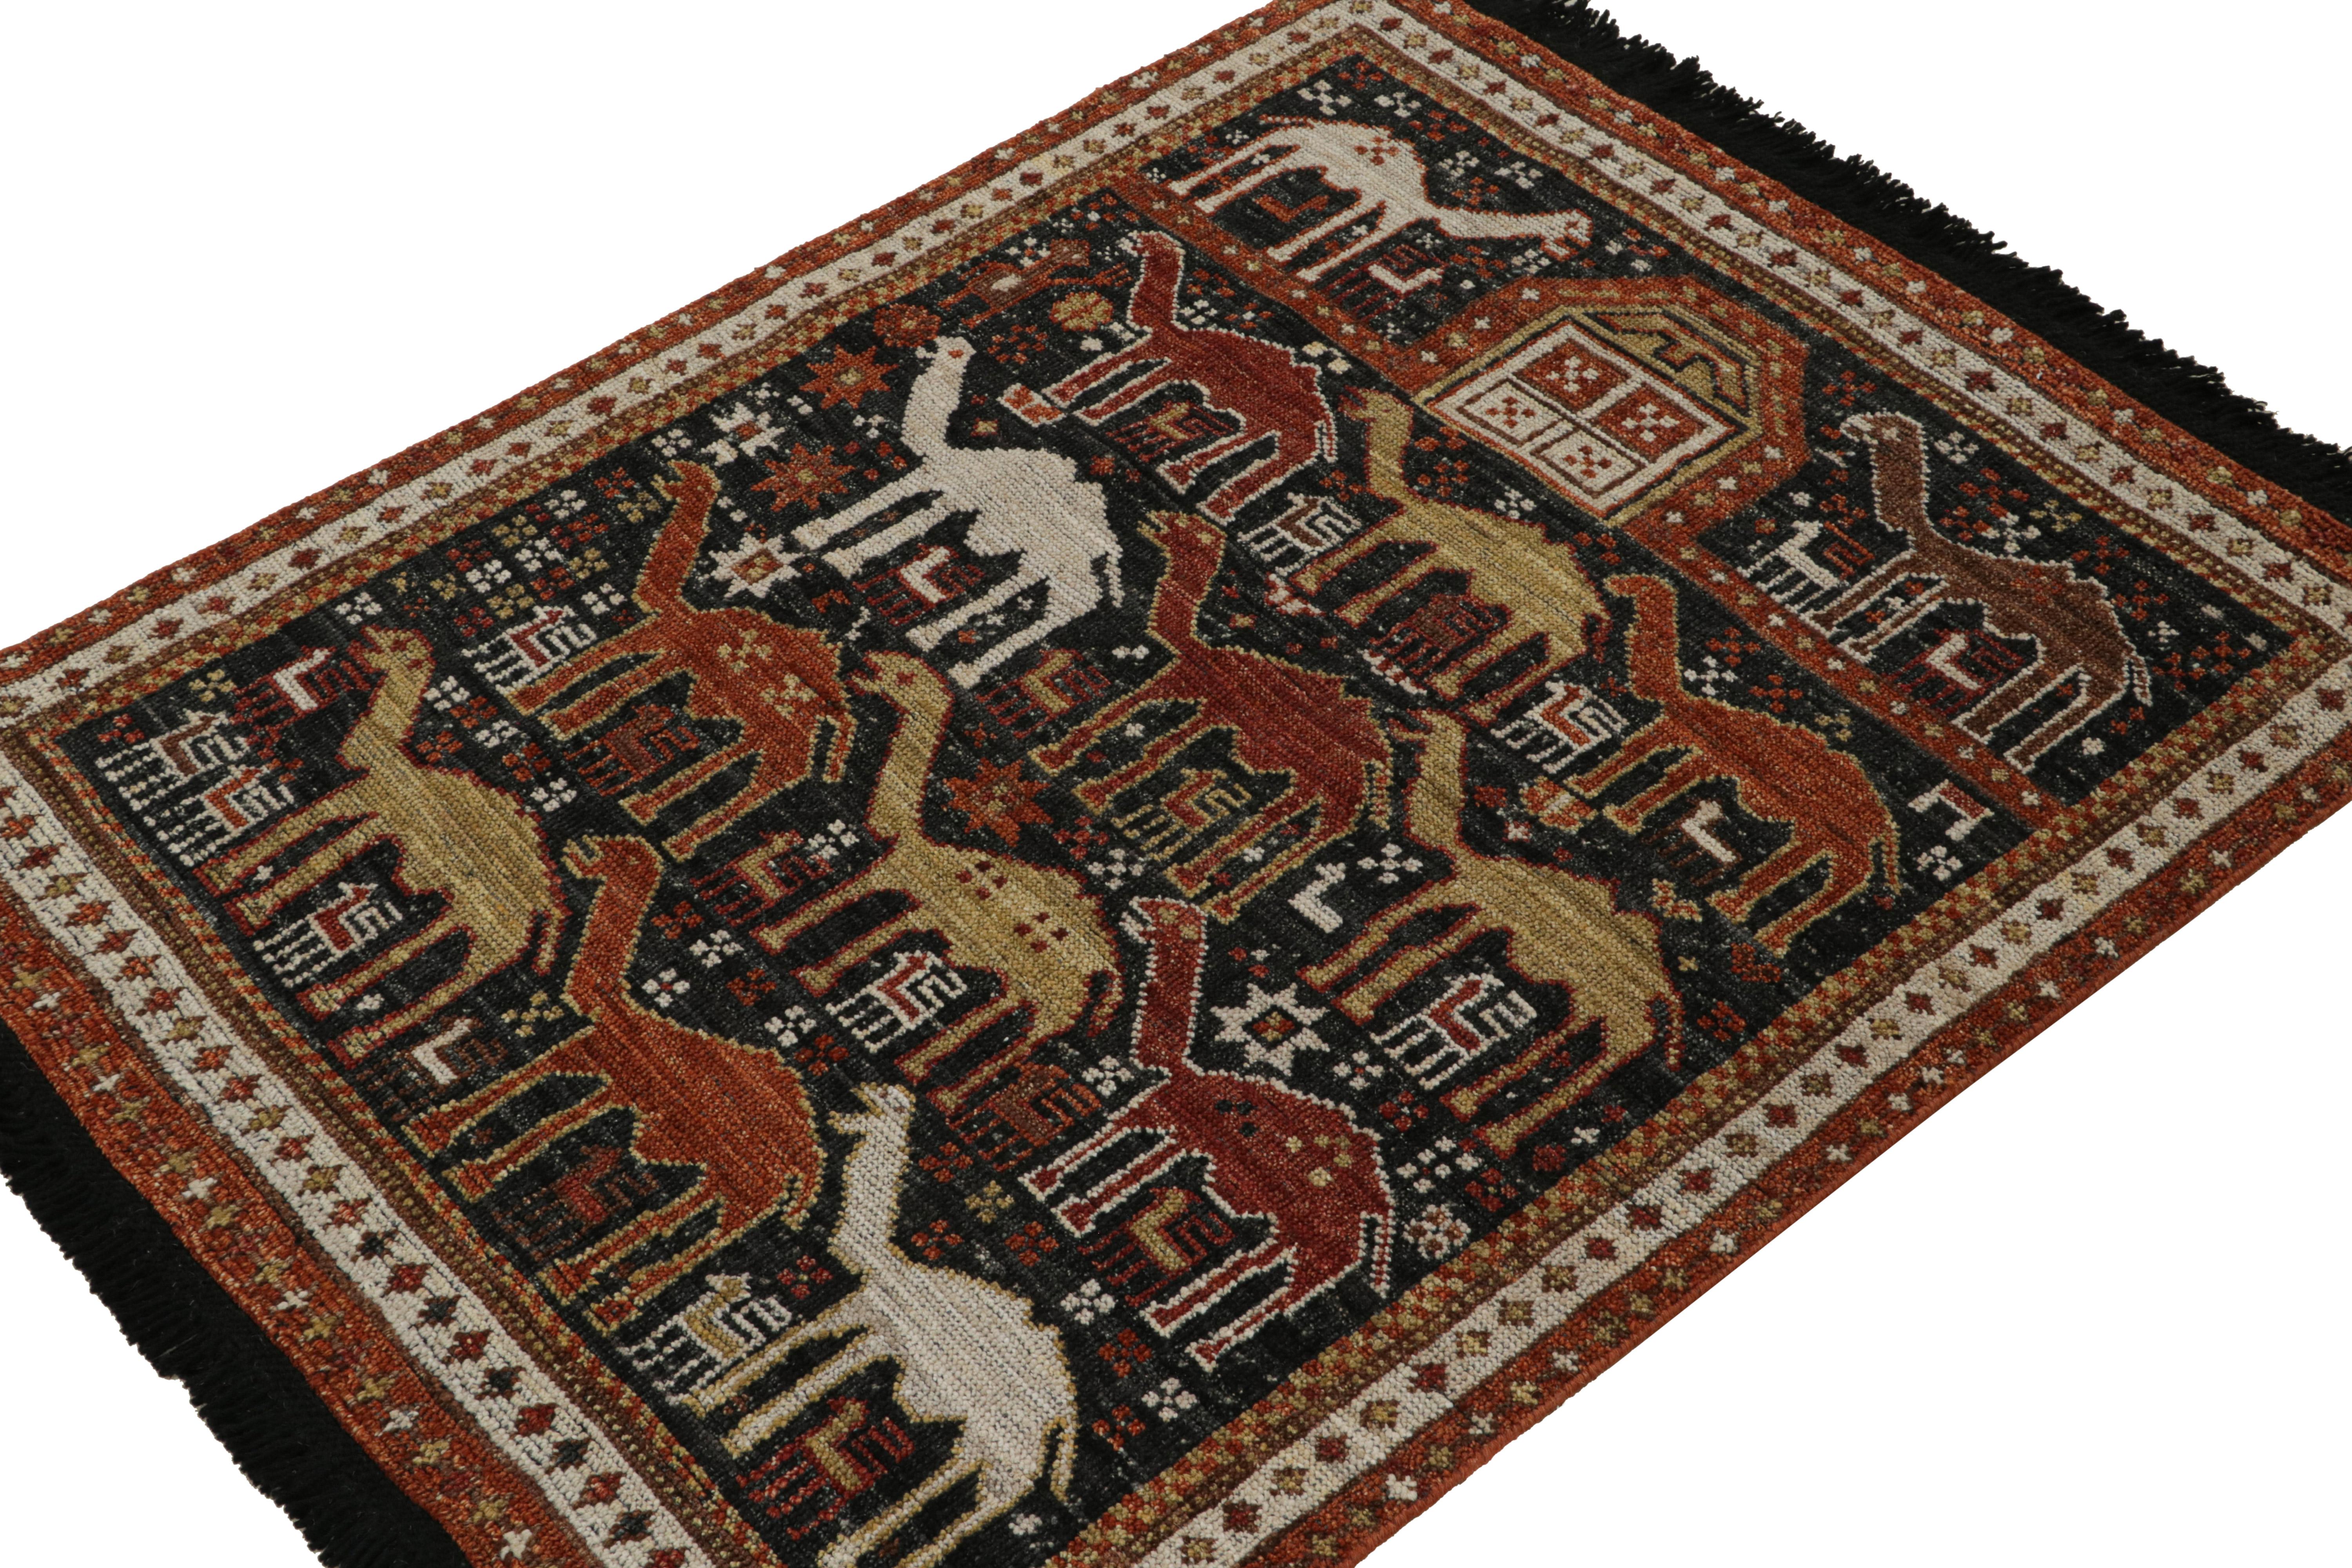 Inspired by antique Caucasian Shirvan rugs, this 3x4 classic style rug from the Burano Collection by Rug & Kilim showcases a montage of distinguished pictorial patterns. The rustic drawing captures the eye with a union of geometric designs,